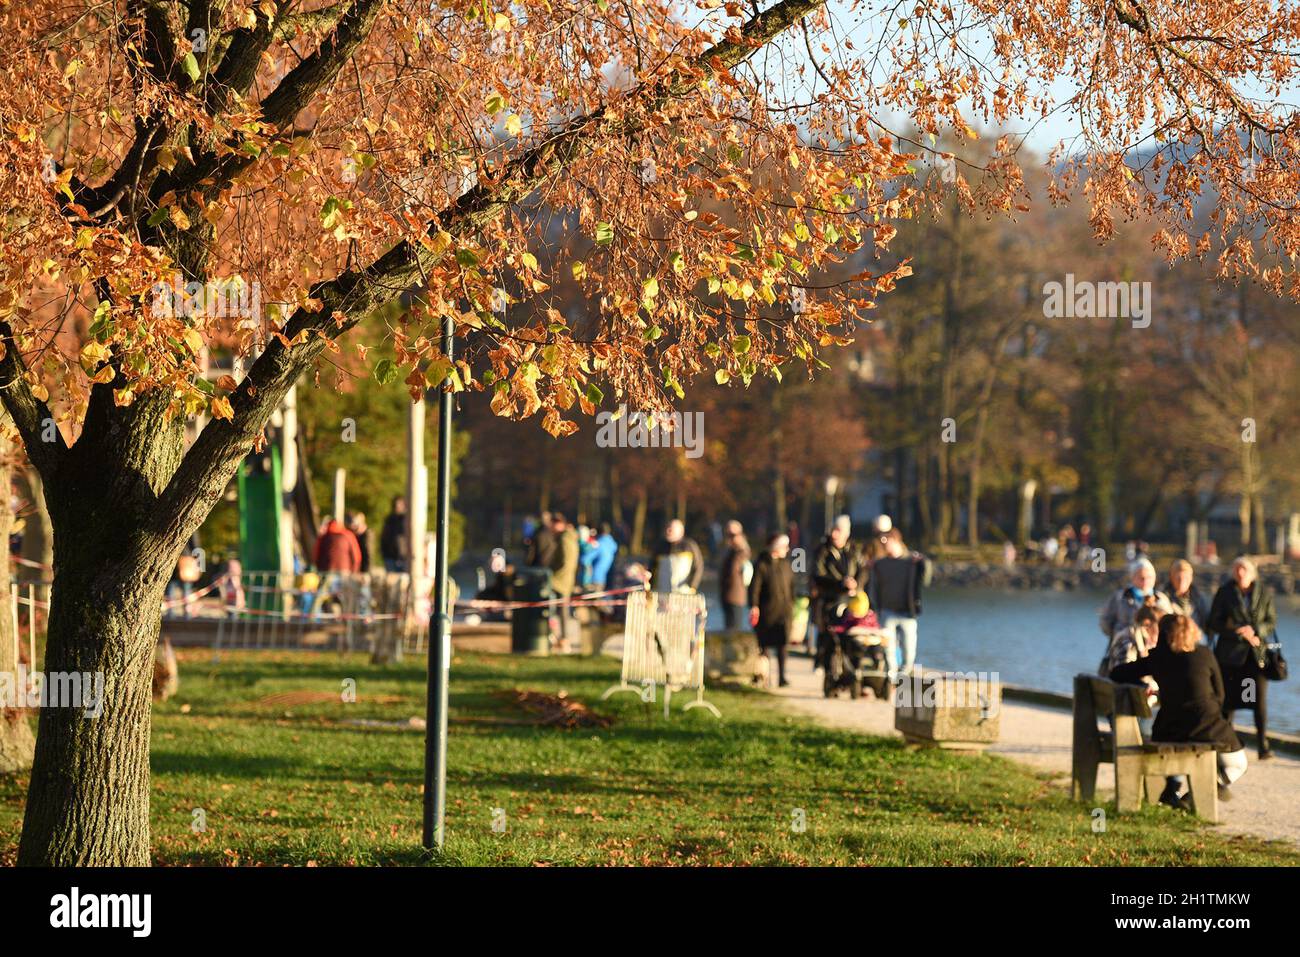 Herbststimmung am Attersee, viele suchen bei sonnigem Wetter Erholung - Autumn mood at the Attersee, many are looking for relaxation in sunny weather Stock Photo